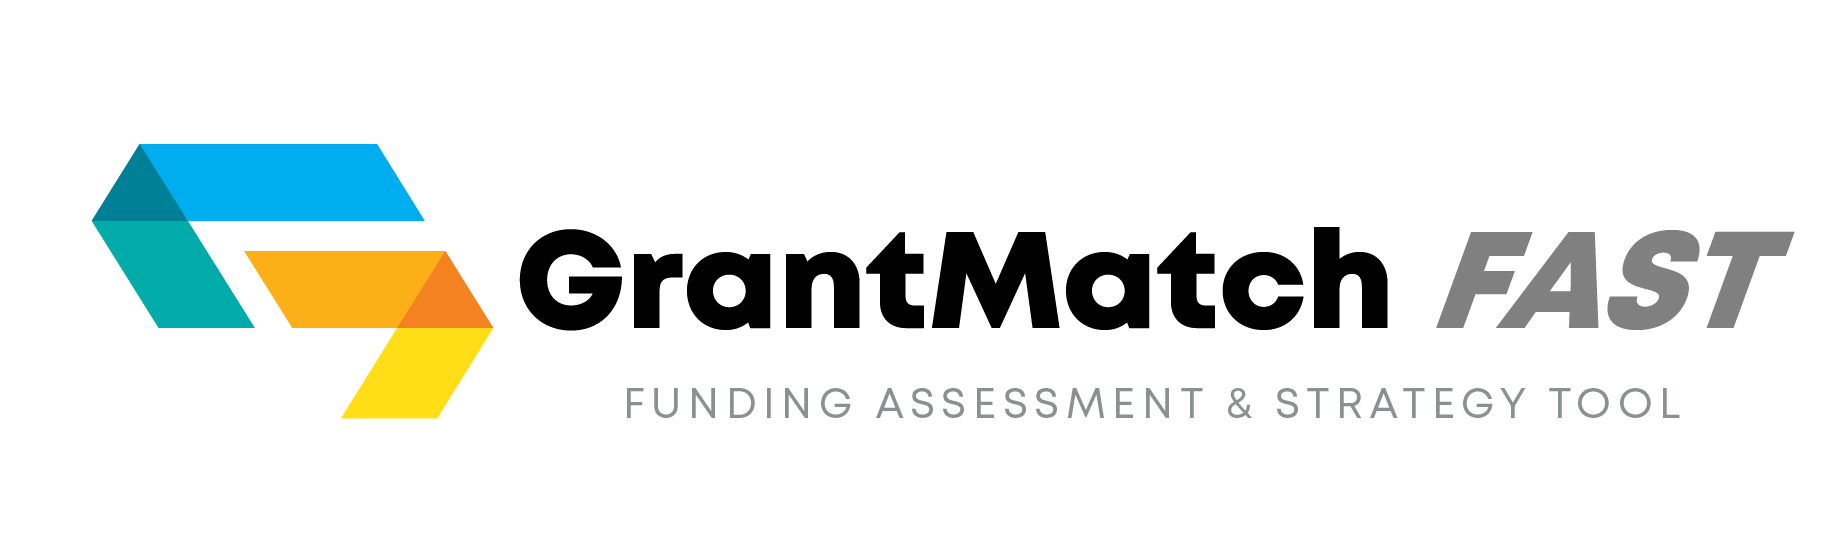 GrantMatch FAST: Funding Assessment & Strategy Tool